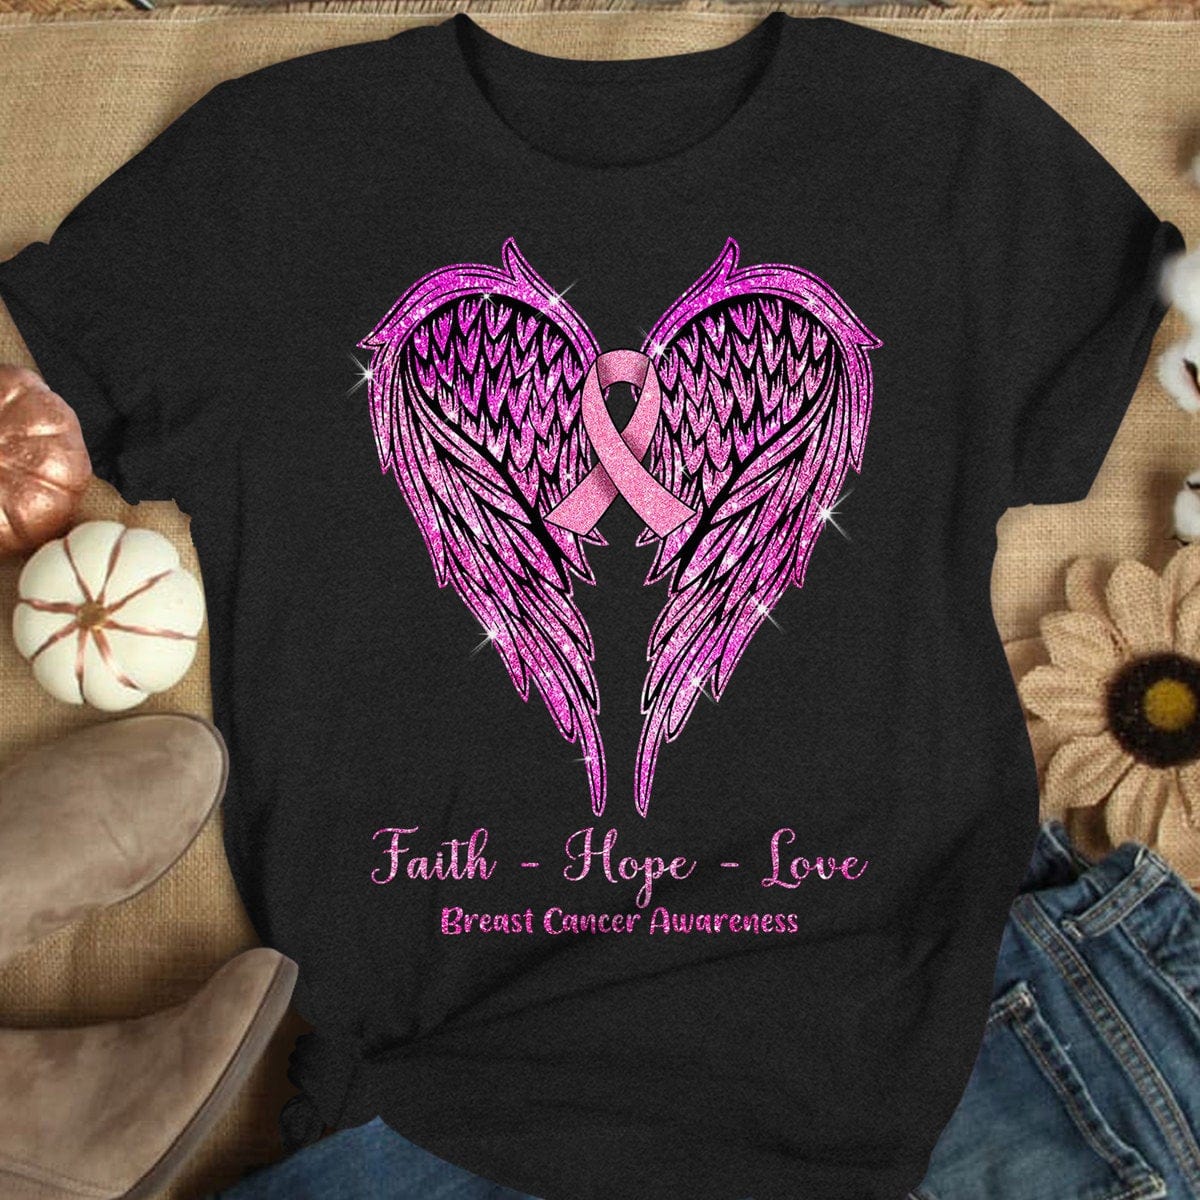 Love - Hope Cancer MX Jersey - Never-Look-Back-nlb